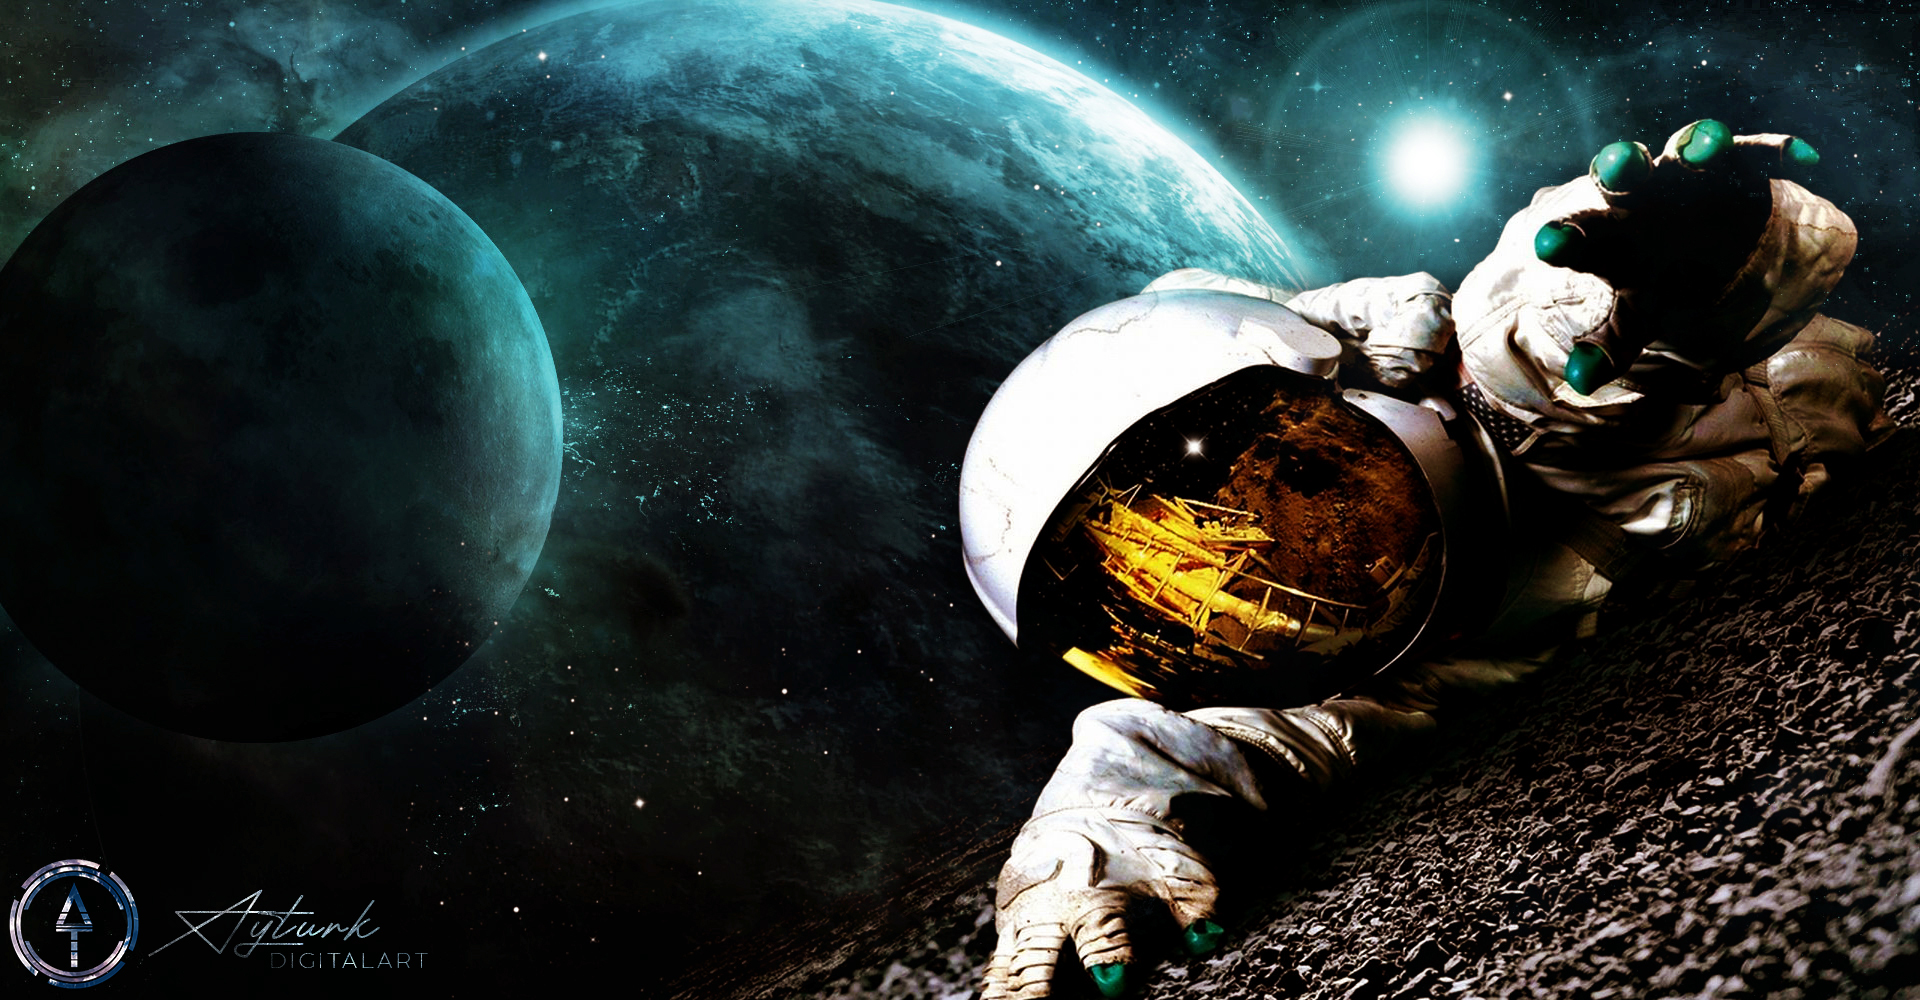 General 1920x1000 space art NASA spacescapes photo manipulation astronaut astronomy skyscape photoshopped galaxy planet